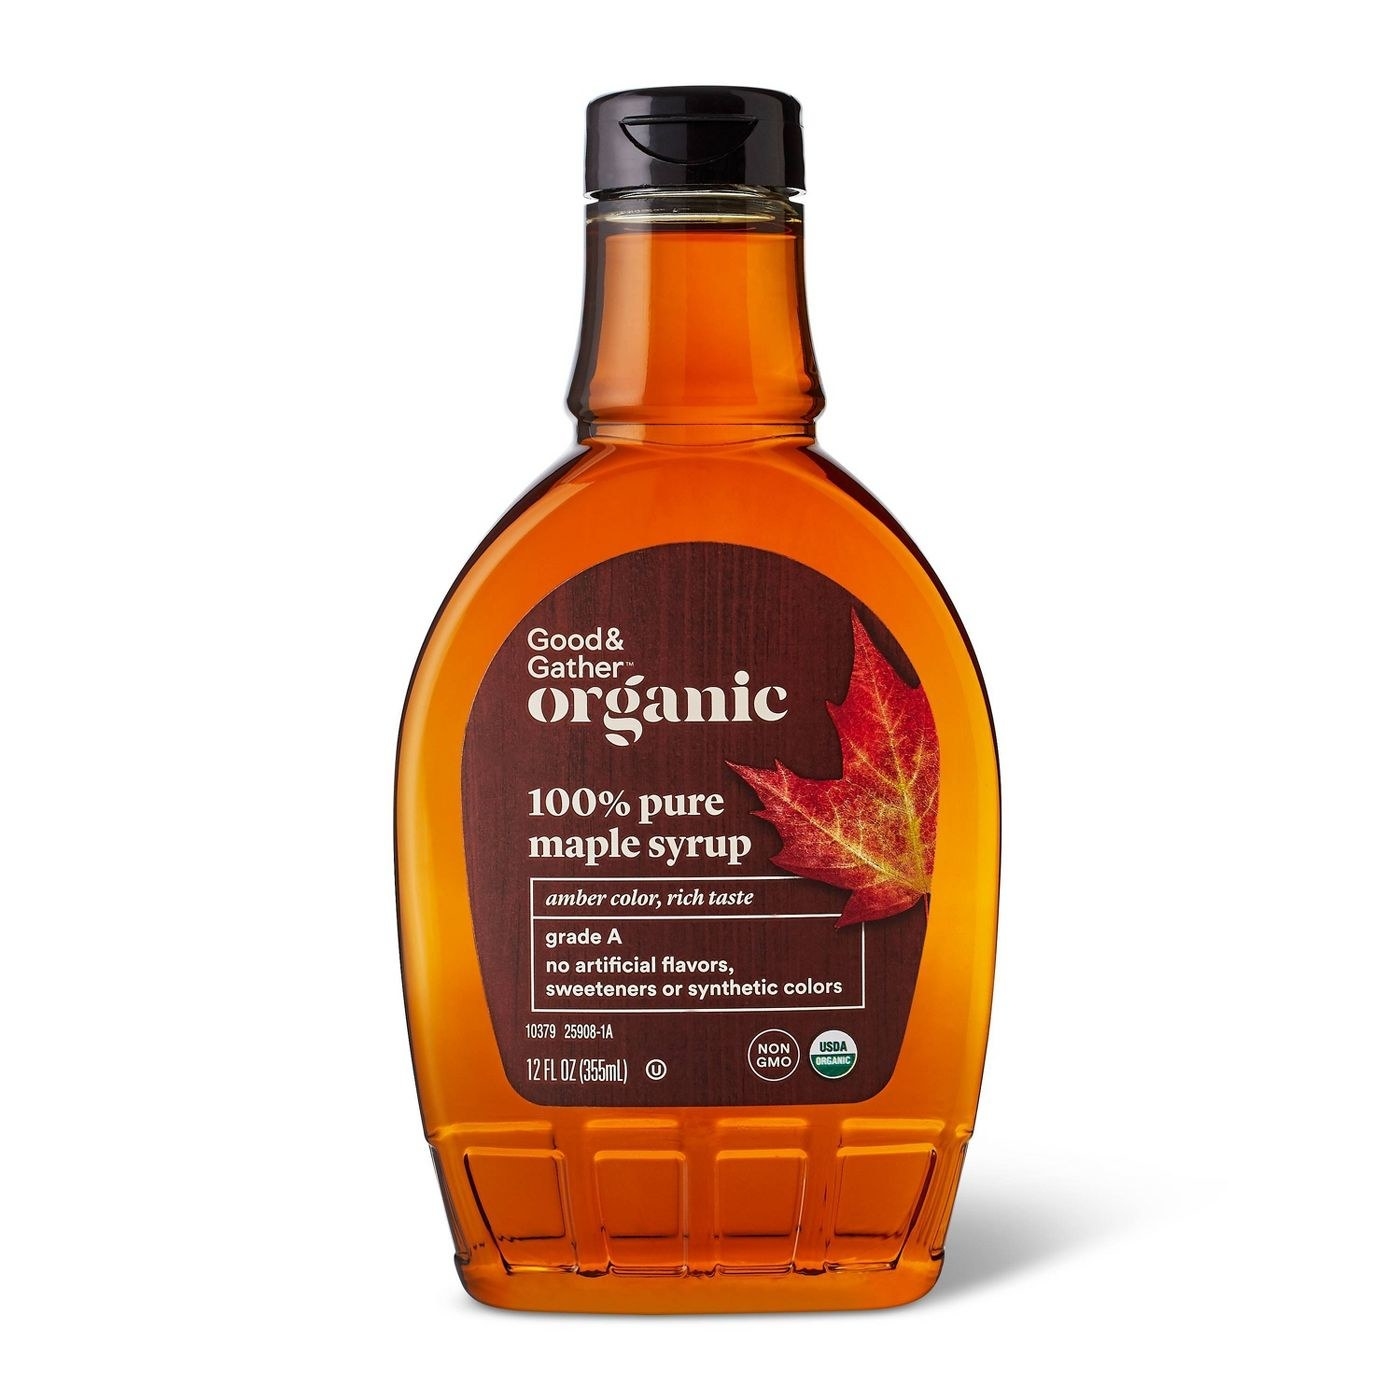 the organic maple syrup